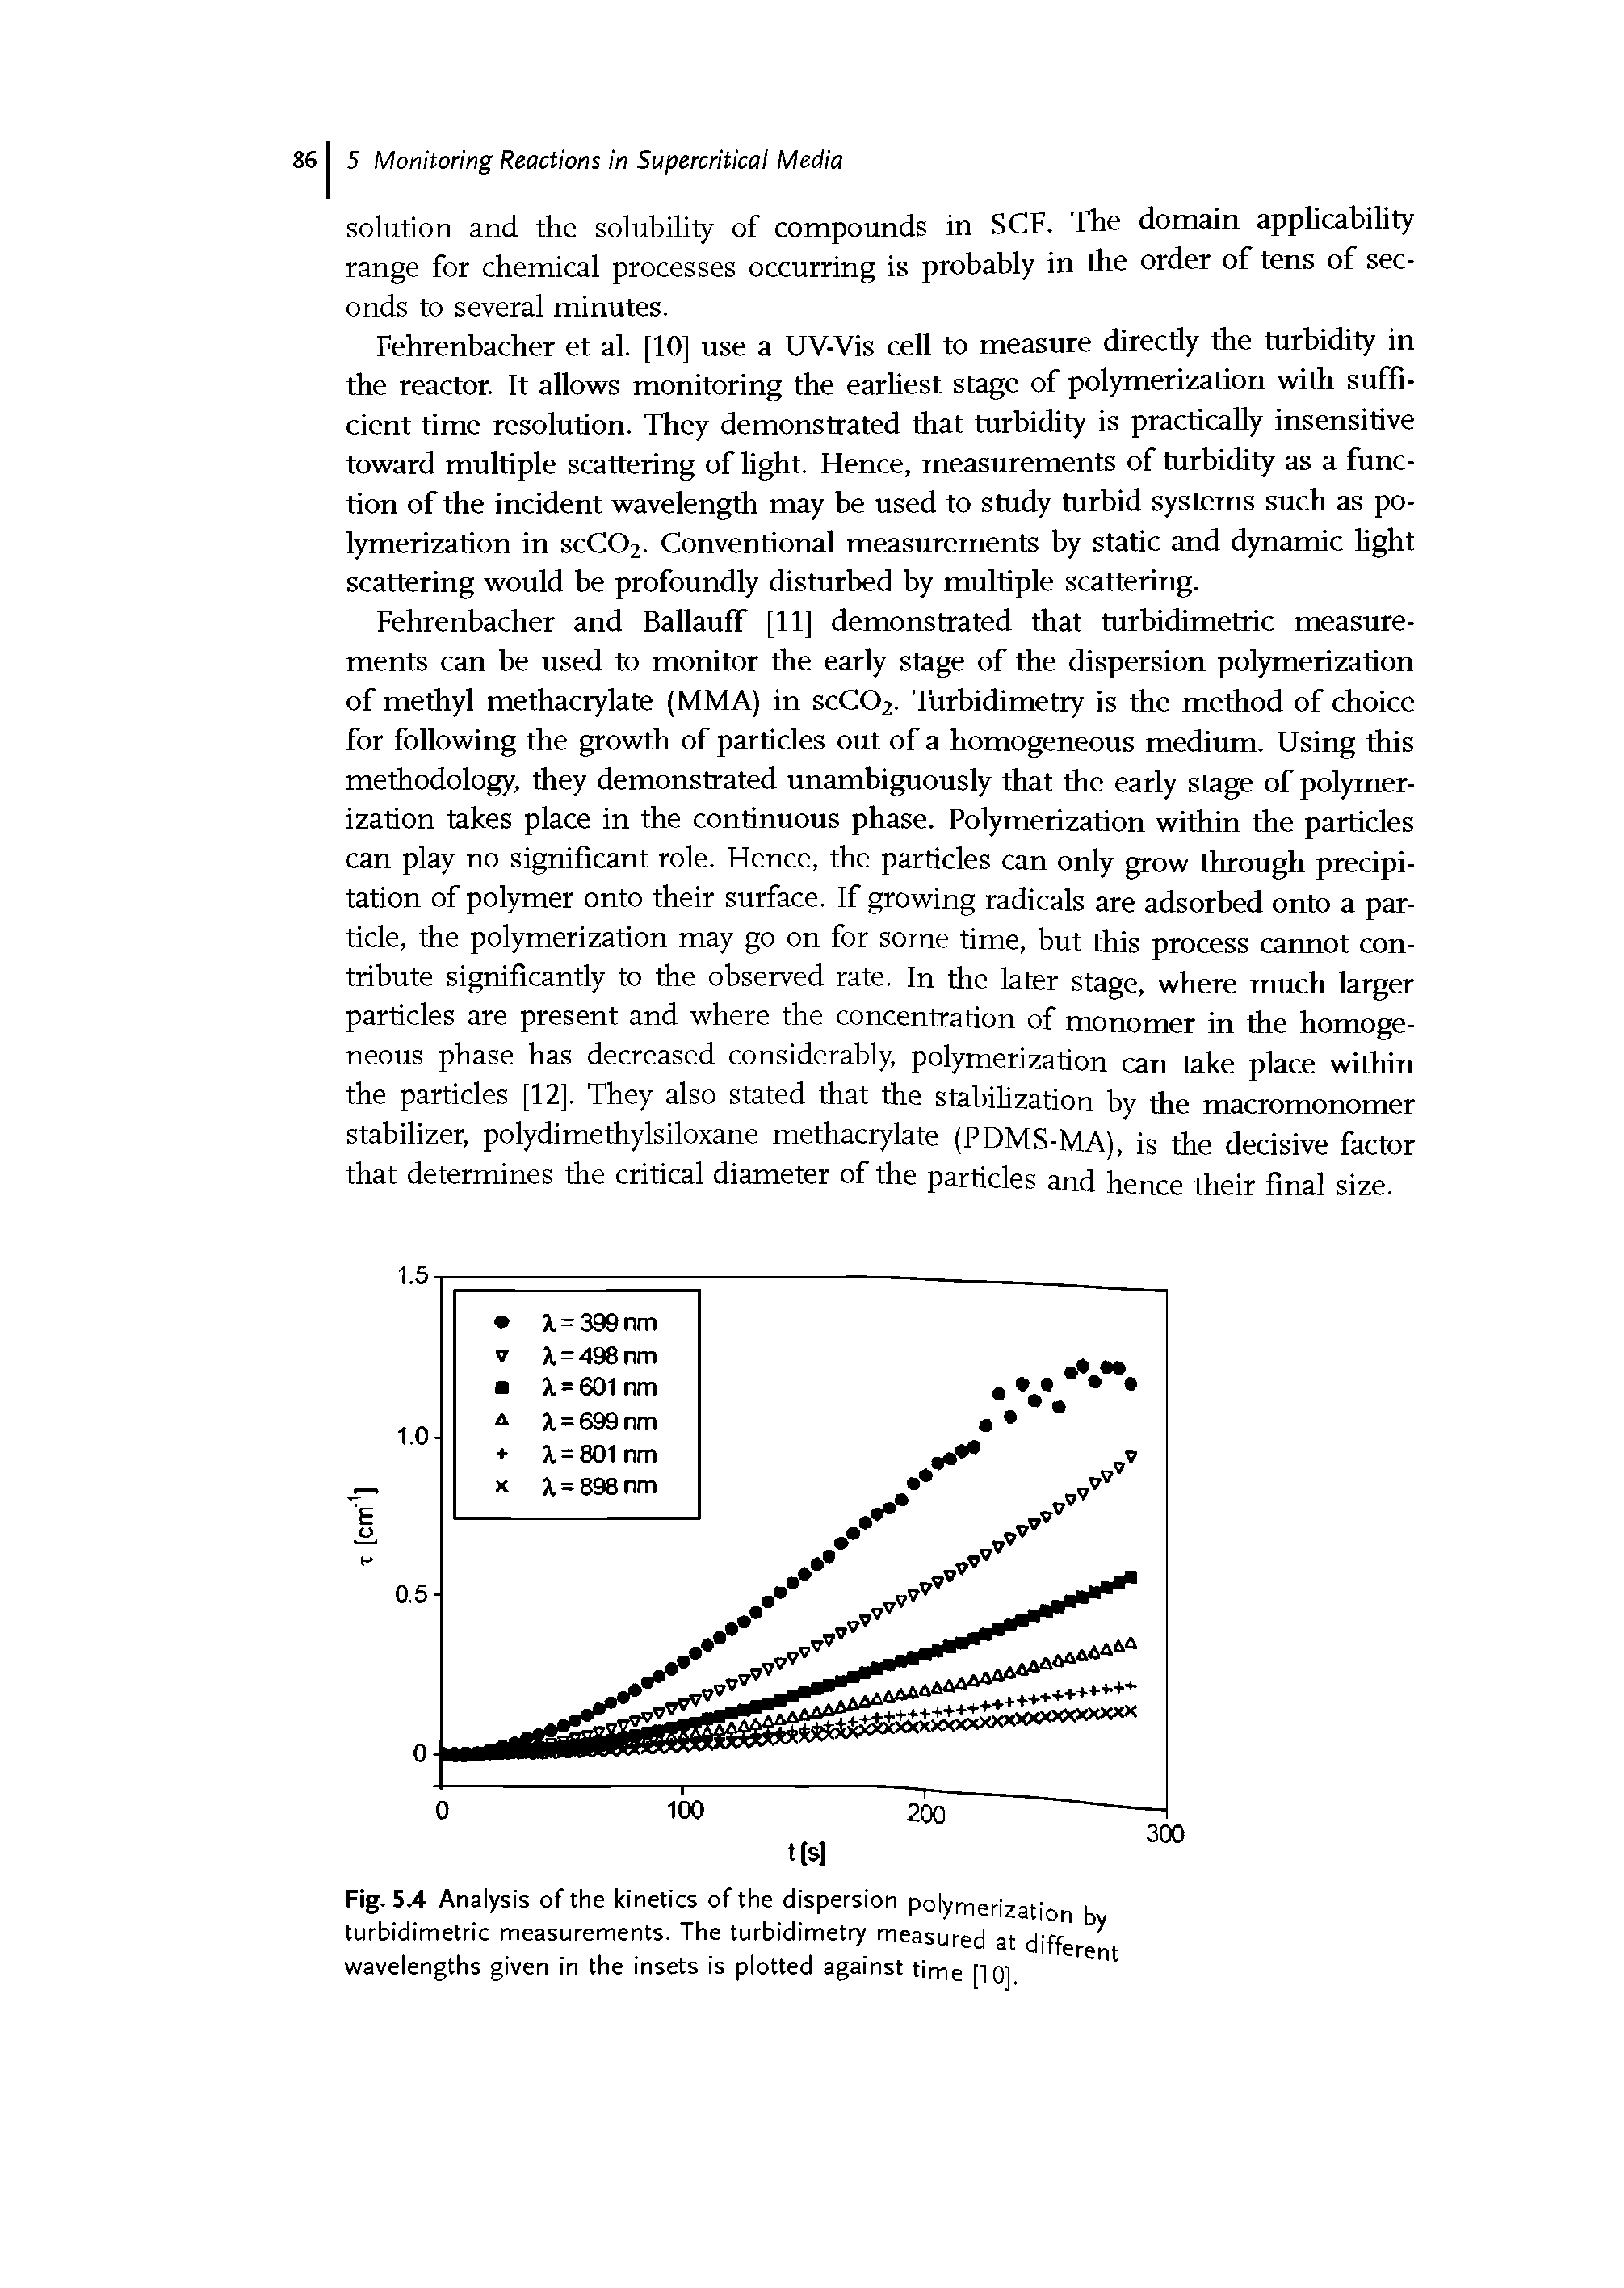 Fig. 5.4 Analysis of the kinetics of the dispersion polymerization by turbidimetric measurements. The turbidimetry measured at different wavelengths given in the insets is plotted against time [10].